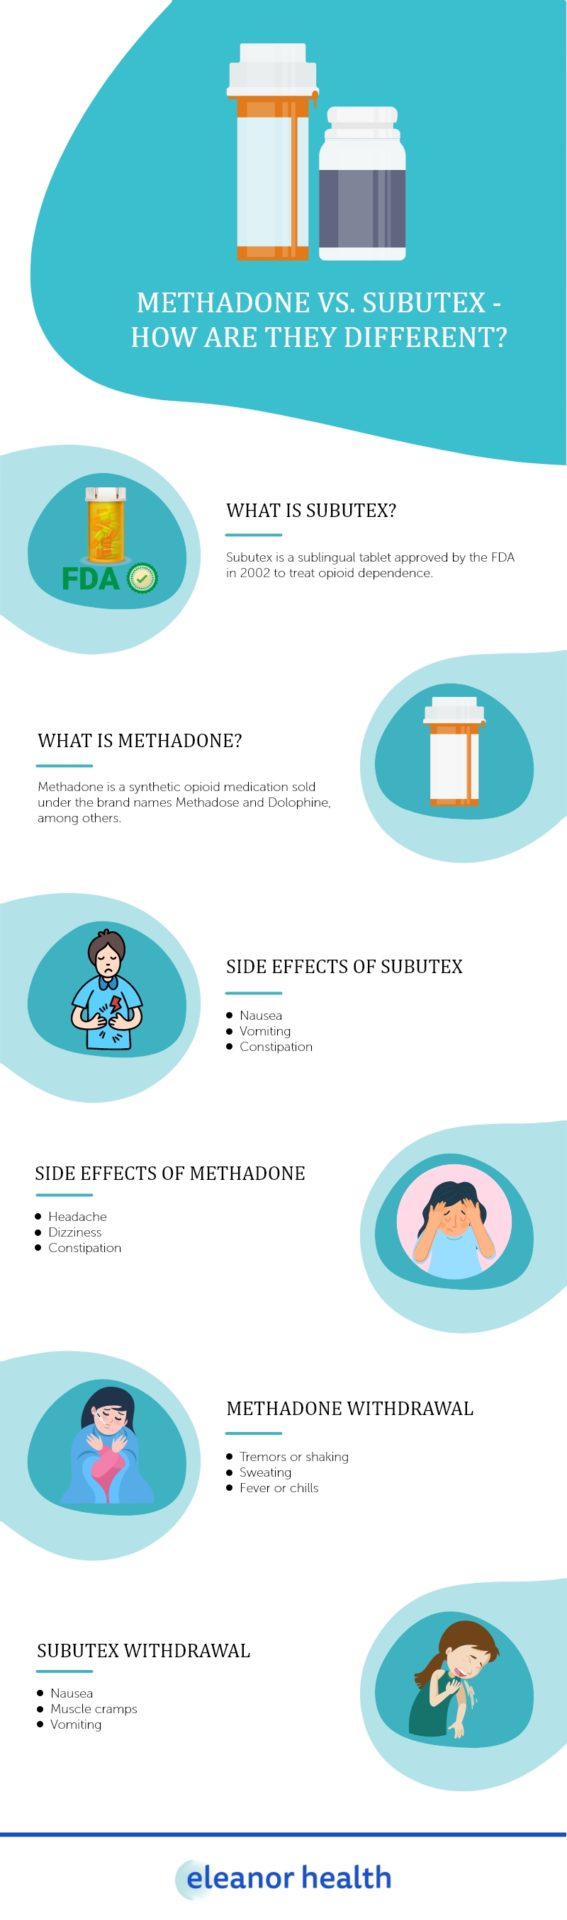 Methadone vs. Subutex - How Are They Different - Eleanor Health